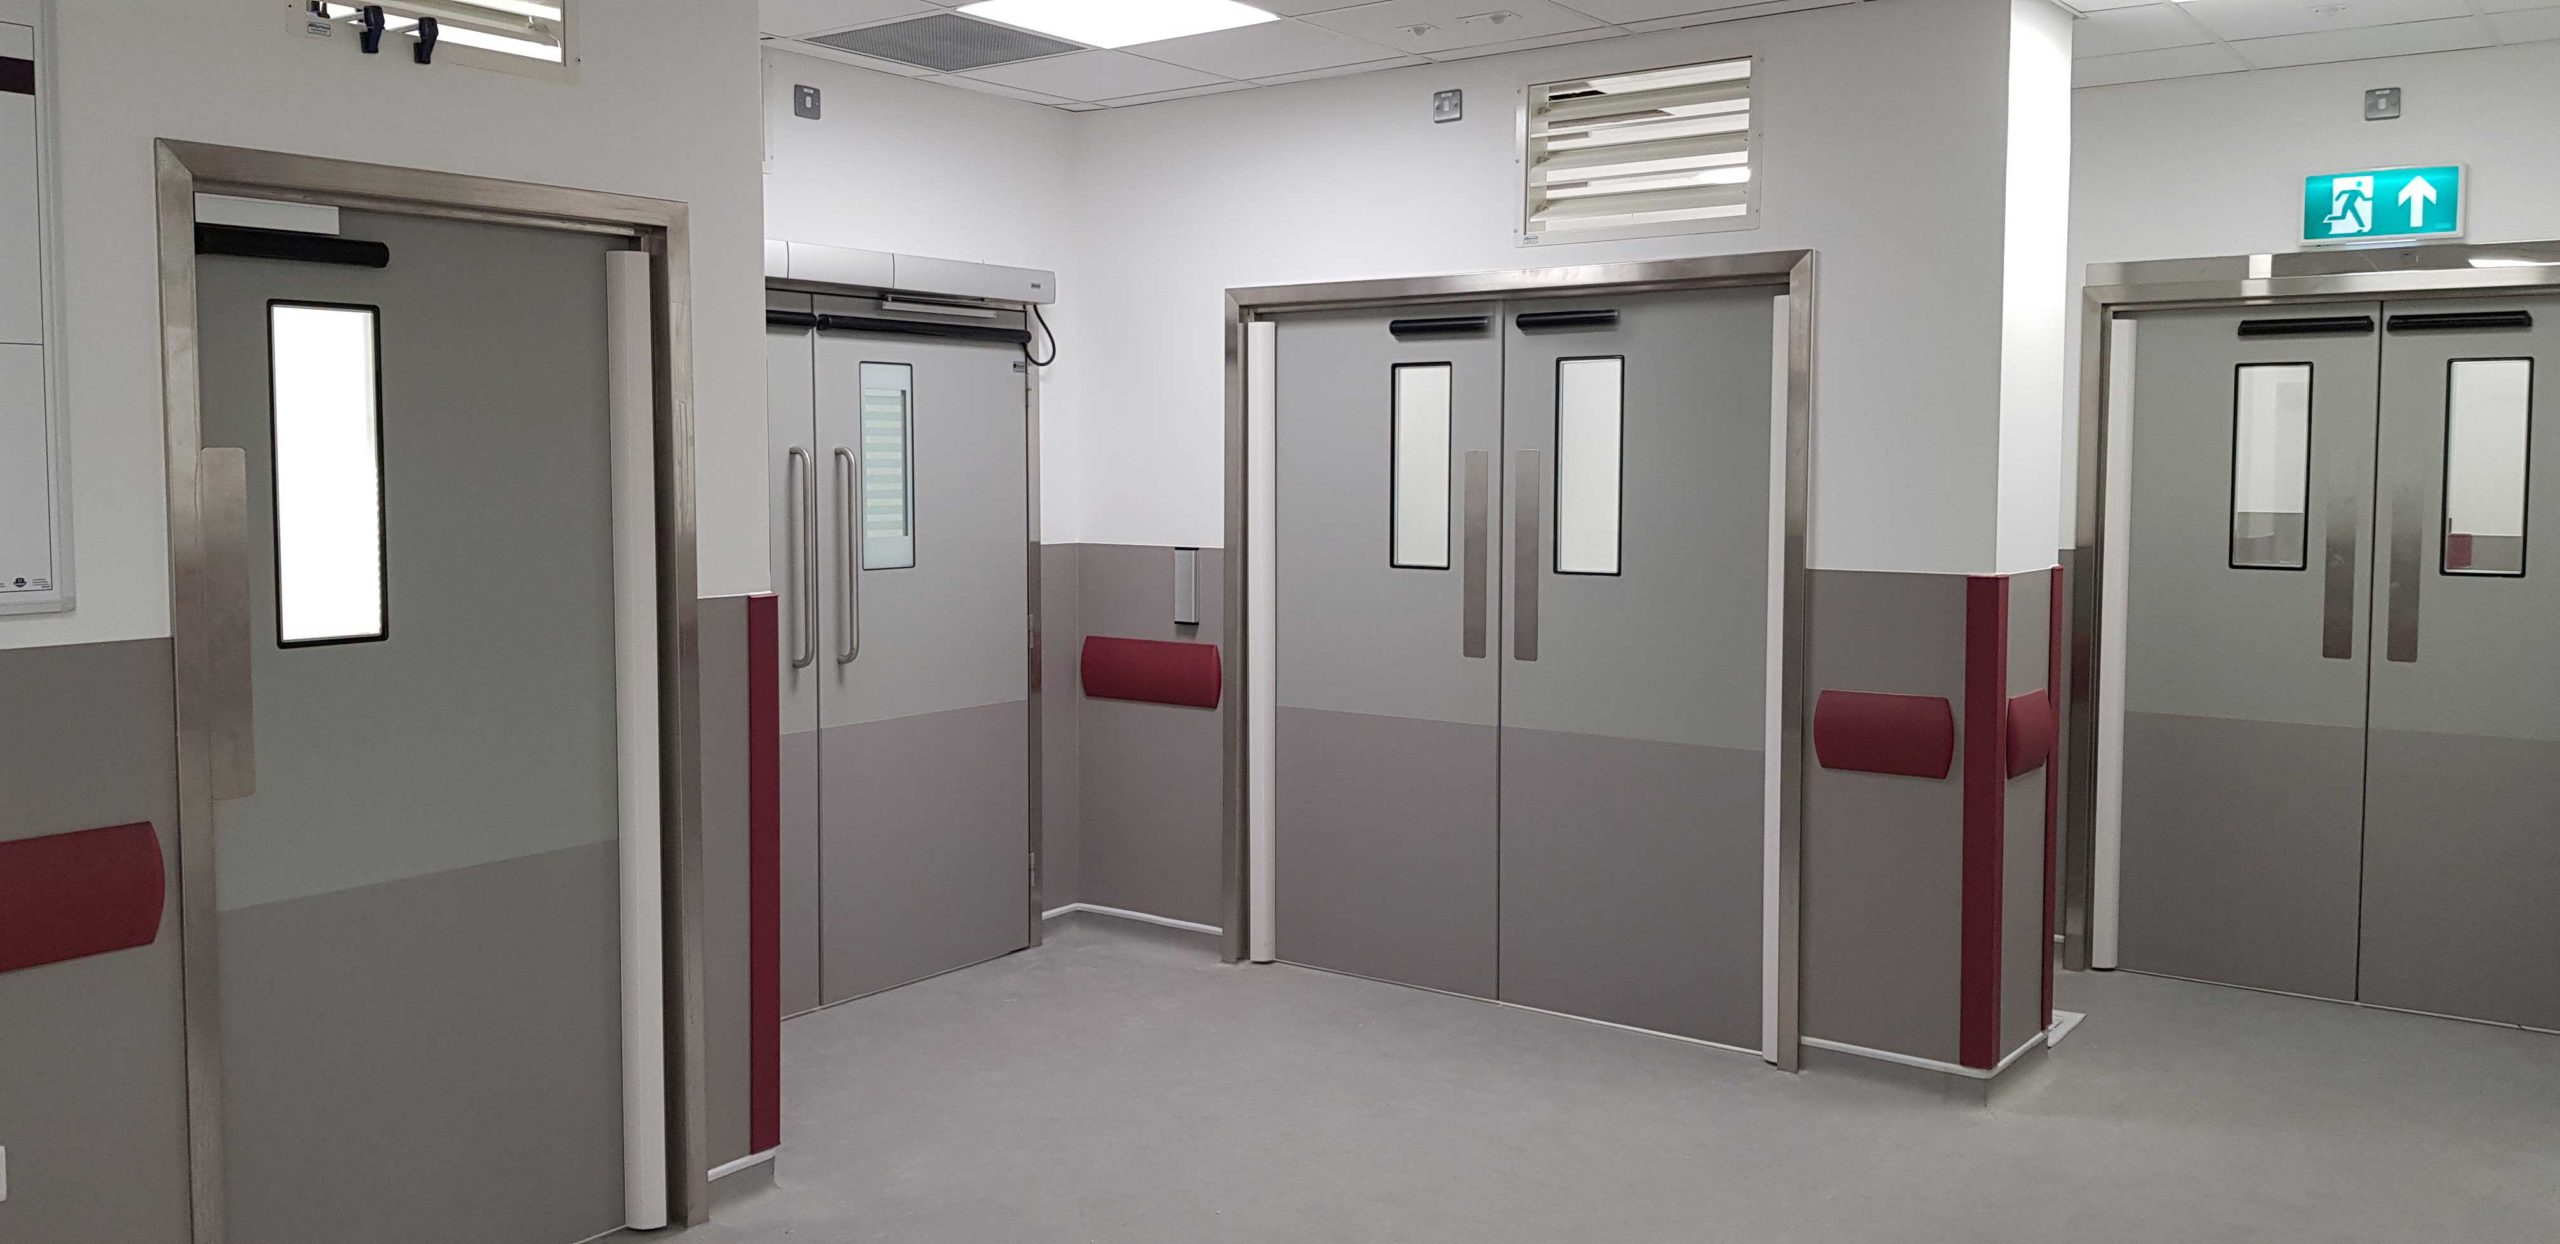 Our Timber-free GRP Doors Are Ideally Suited to the Tough Cleaning Regimes Within Healthcare Facilities.